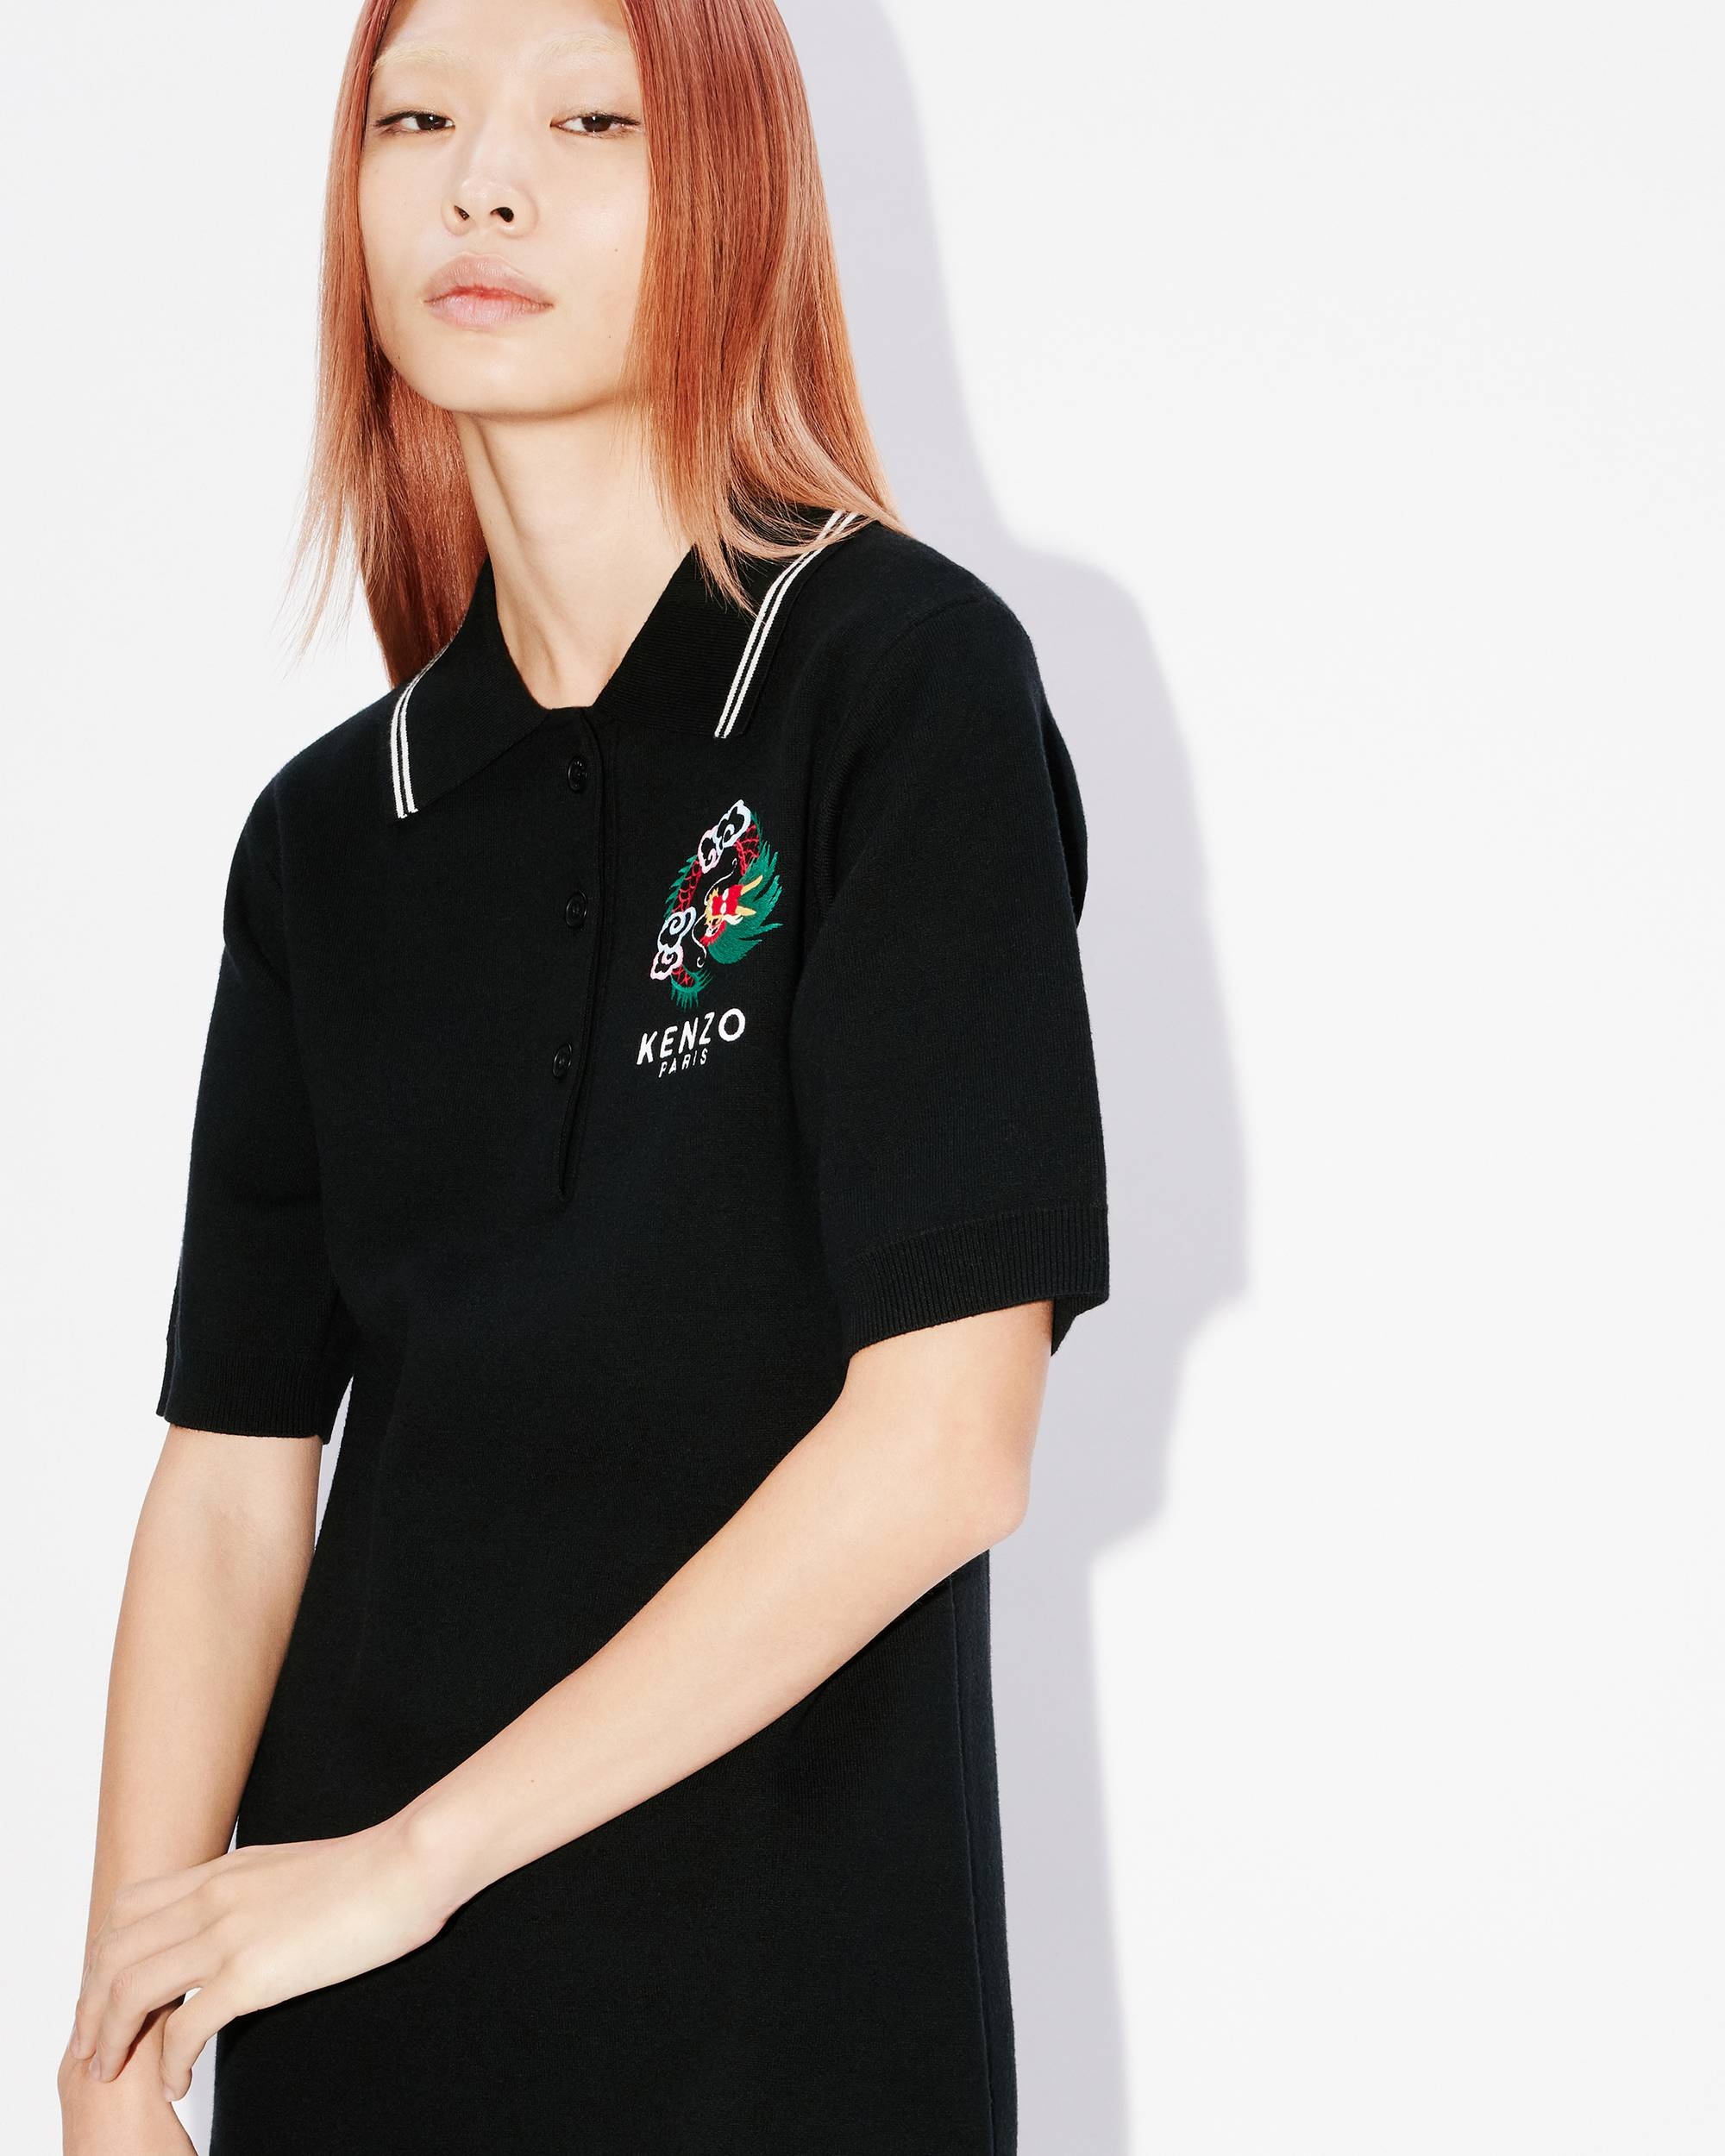 'Year of the Dragon' polo dress - 8